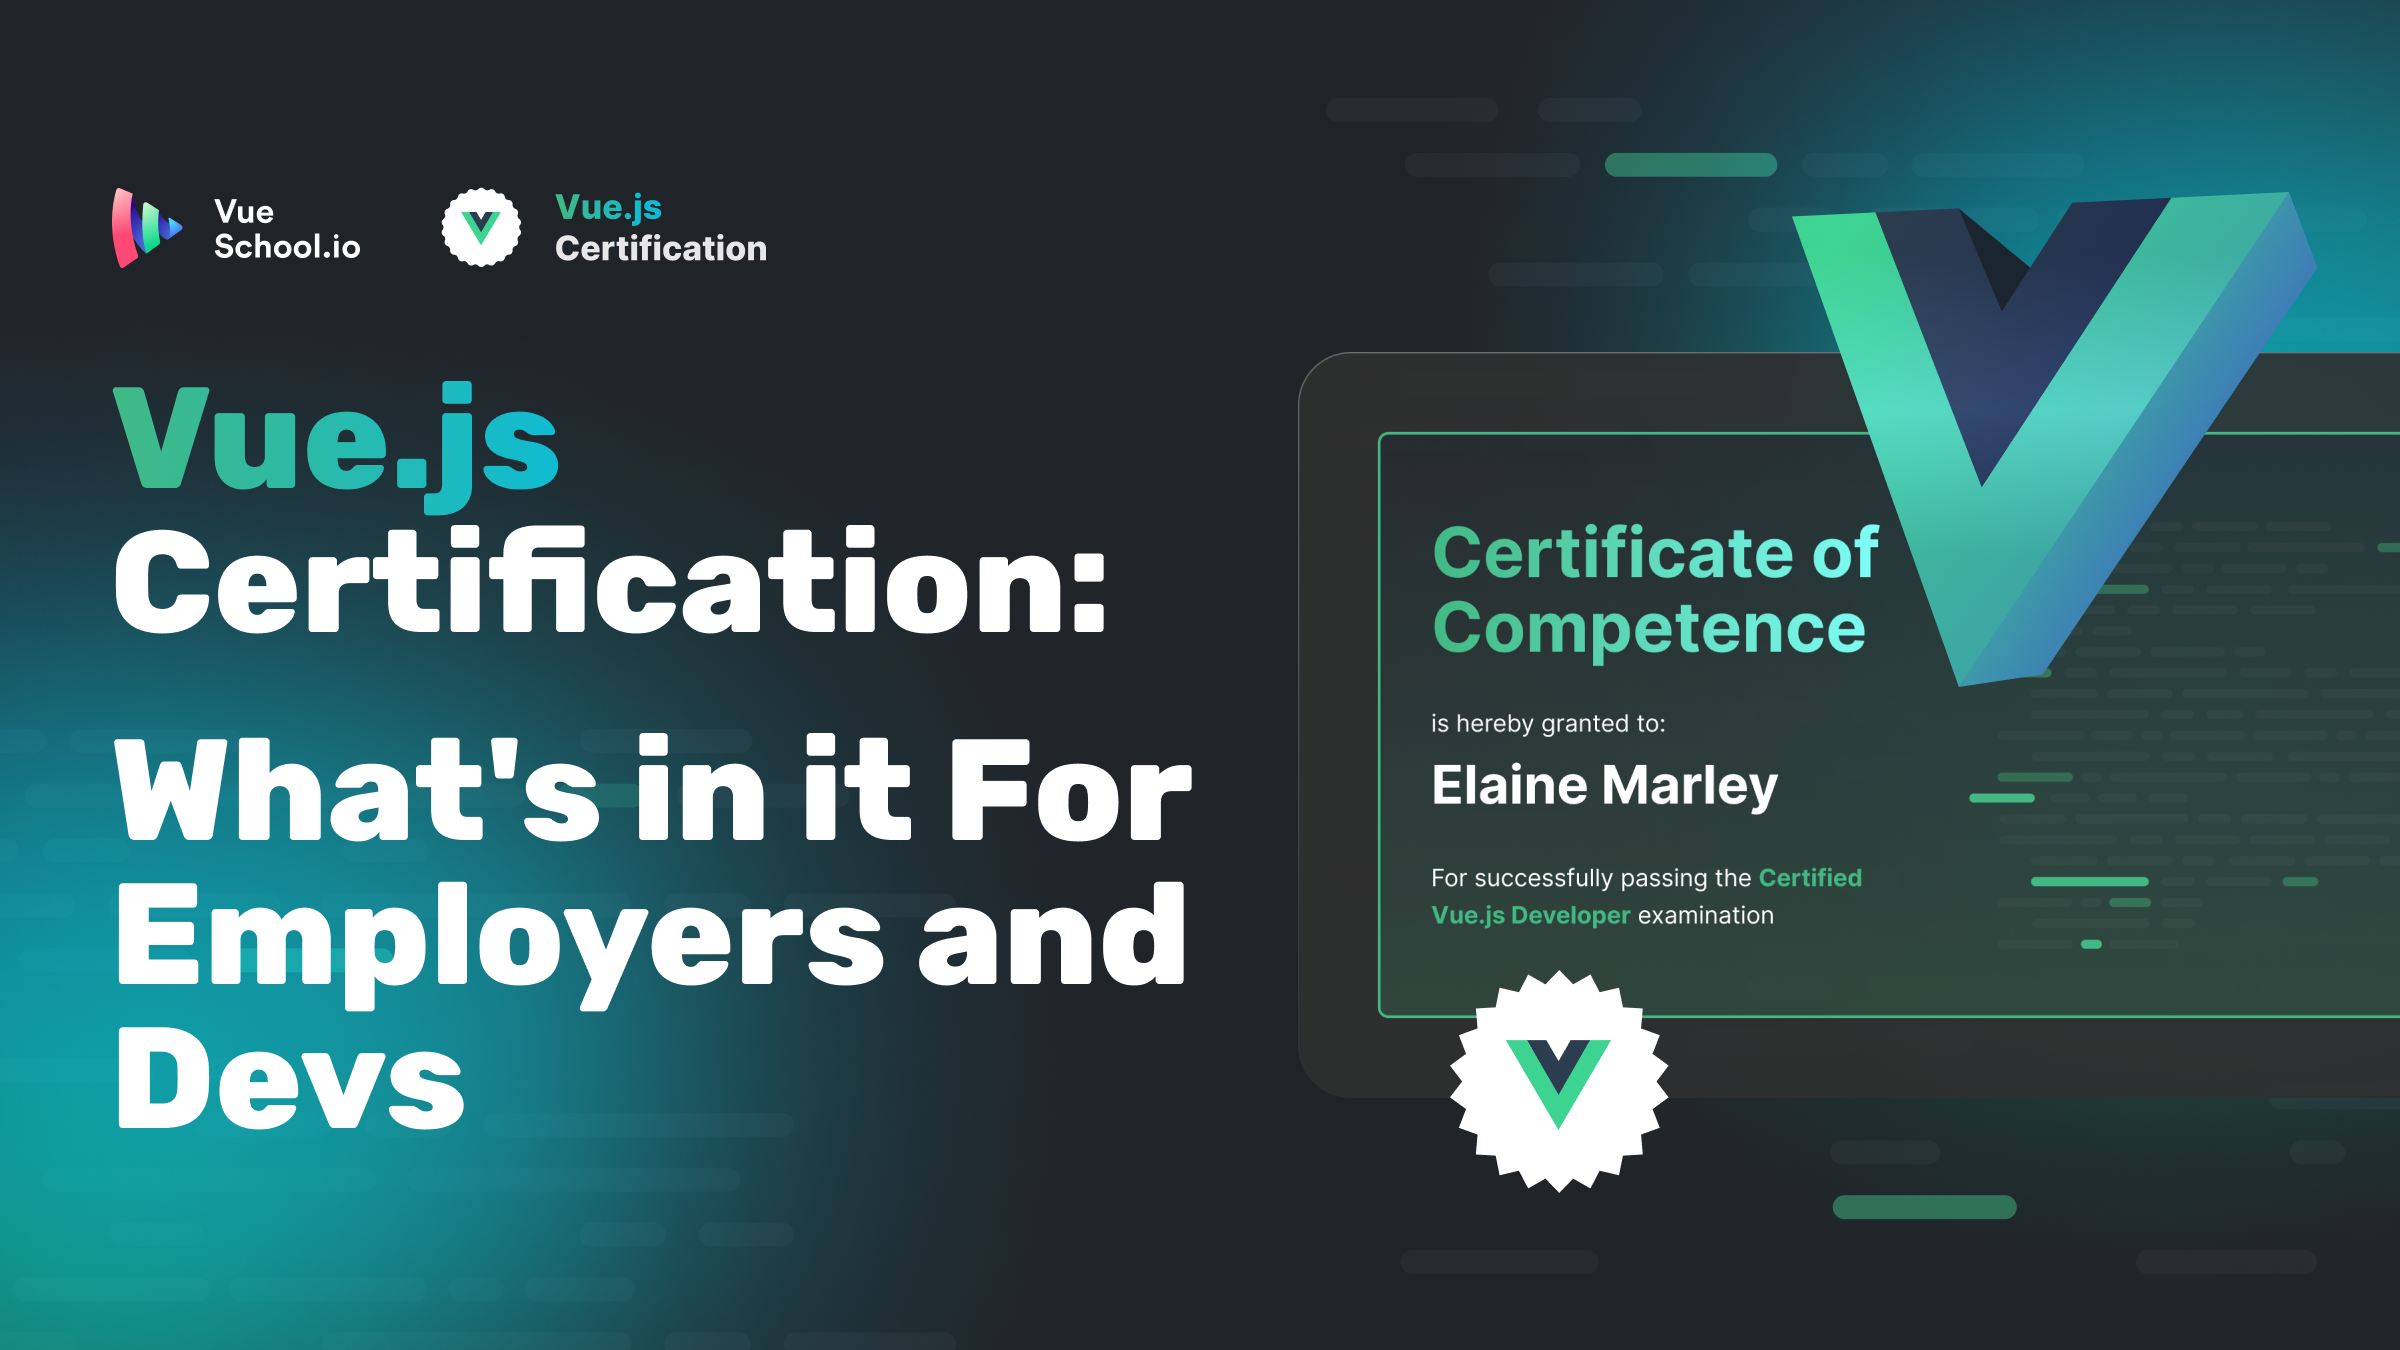 The Vue.js Certification: What's in it For Employers and Devs